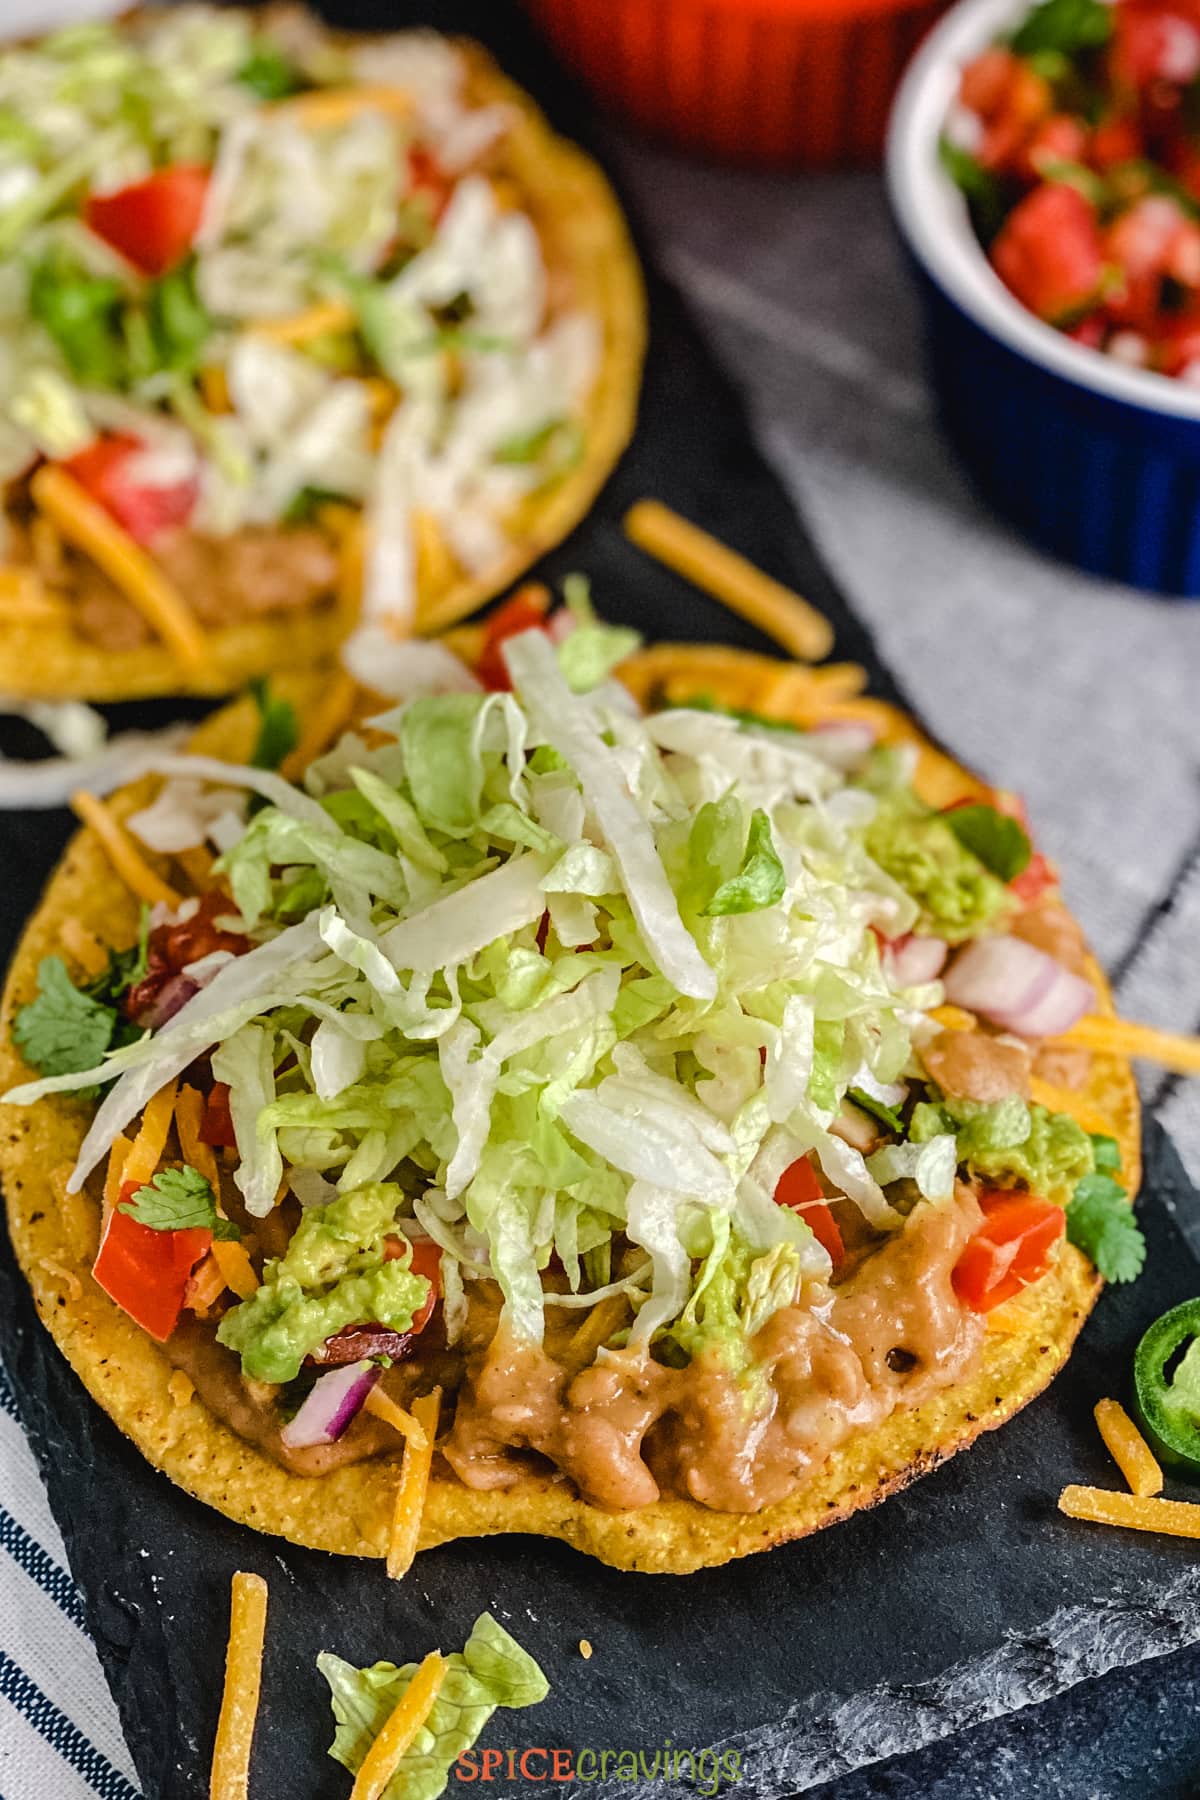 Crisp tortilla topped with lettuce, beans and tomato